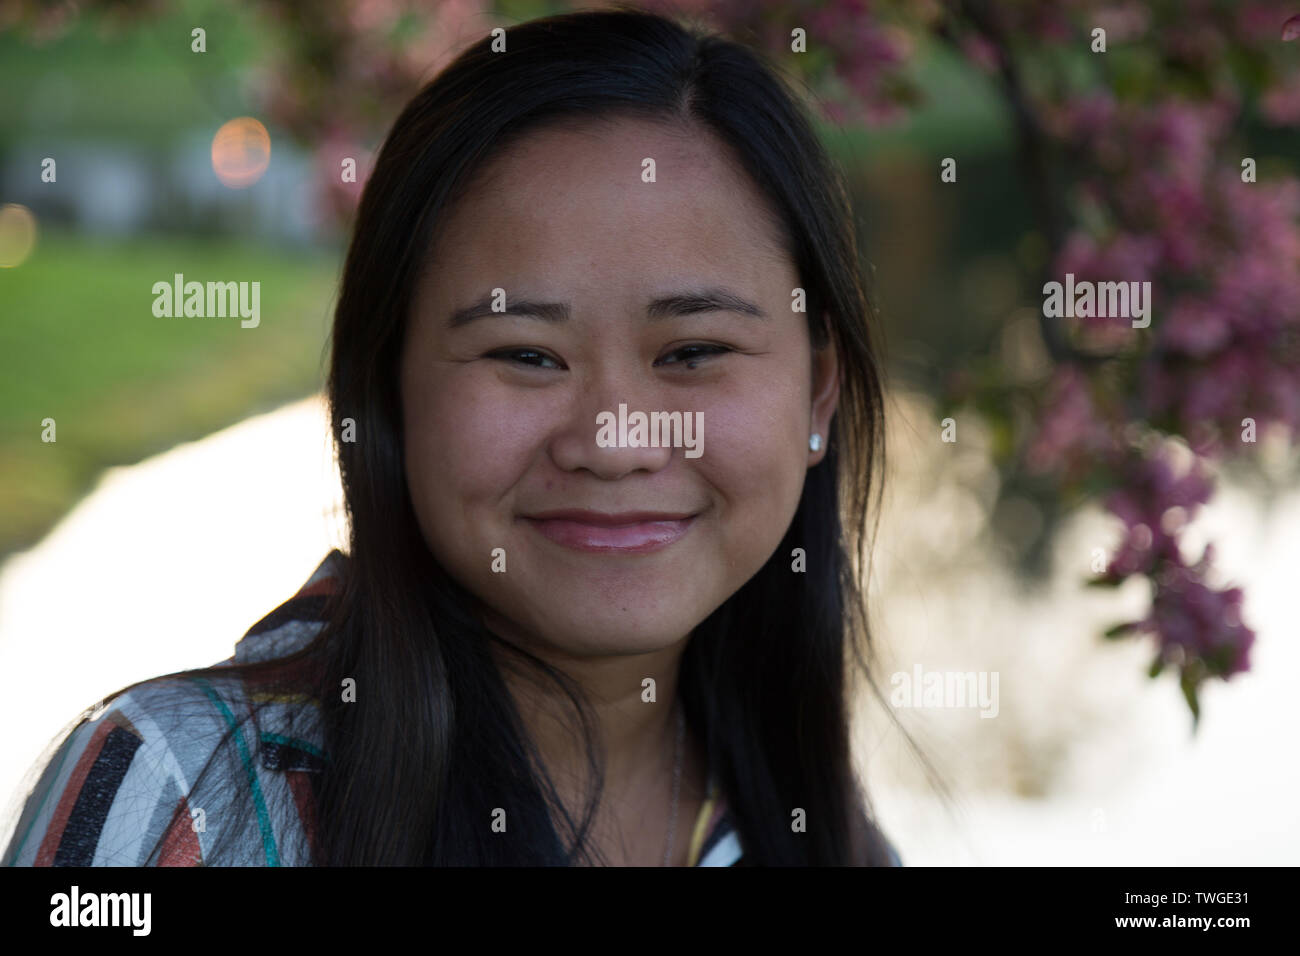 A beautiful teenage girl smiles for the camera in Fort Wayne, Indiana, USA. Stock Photo